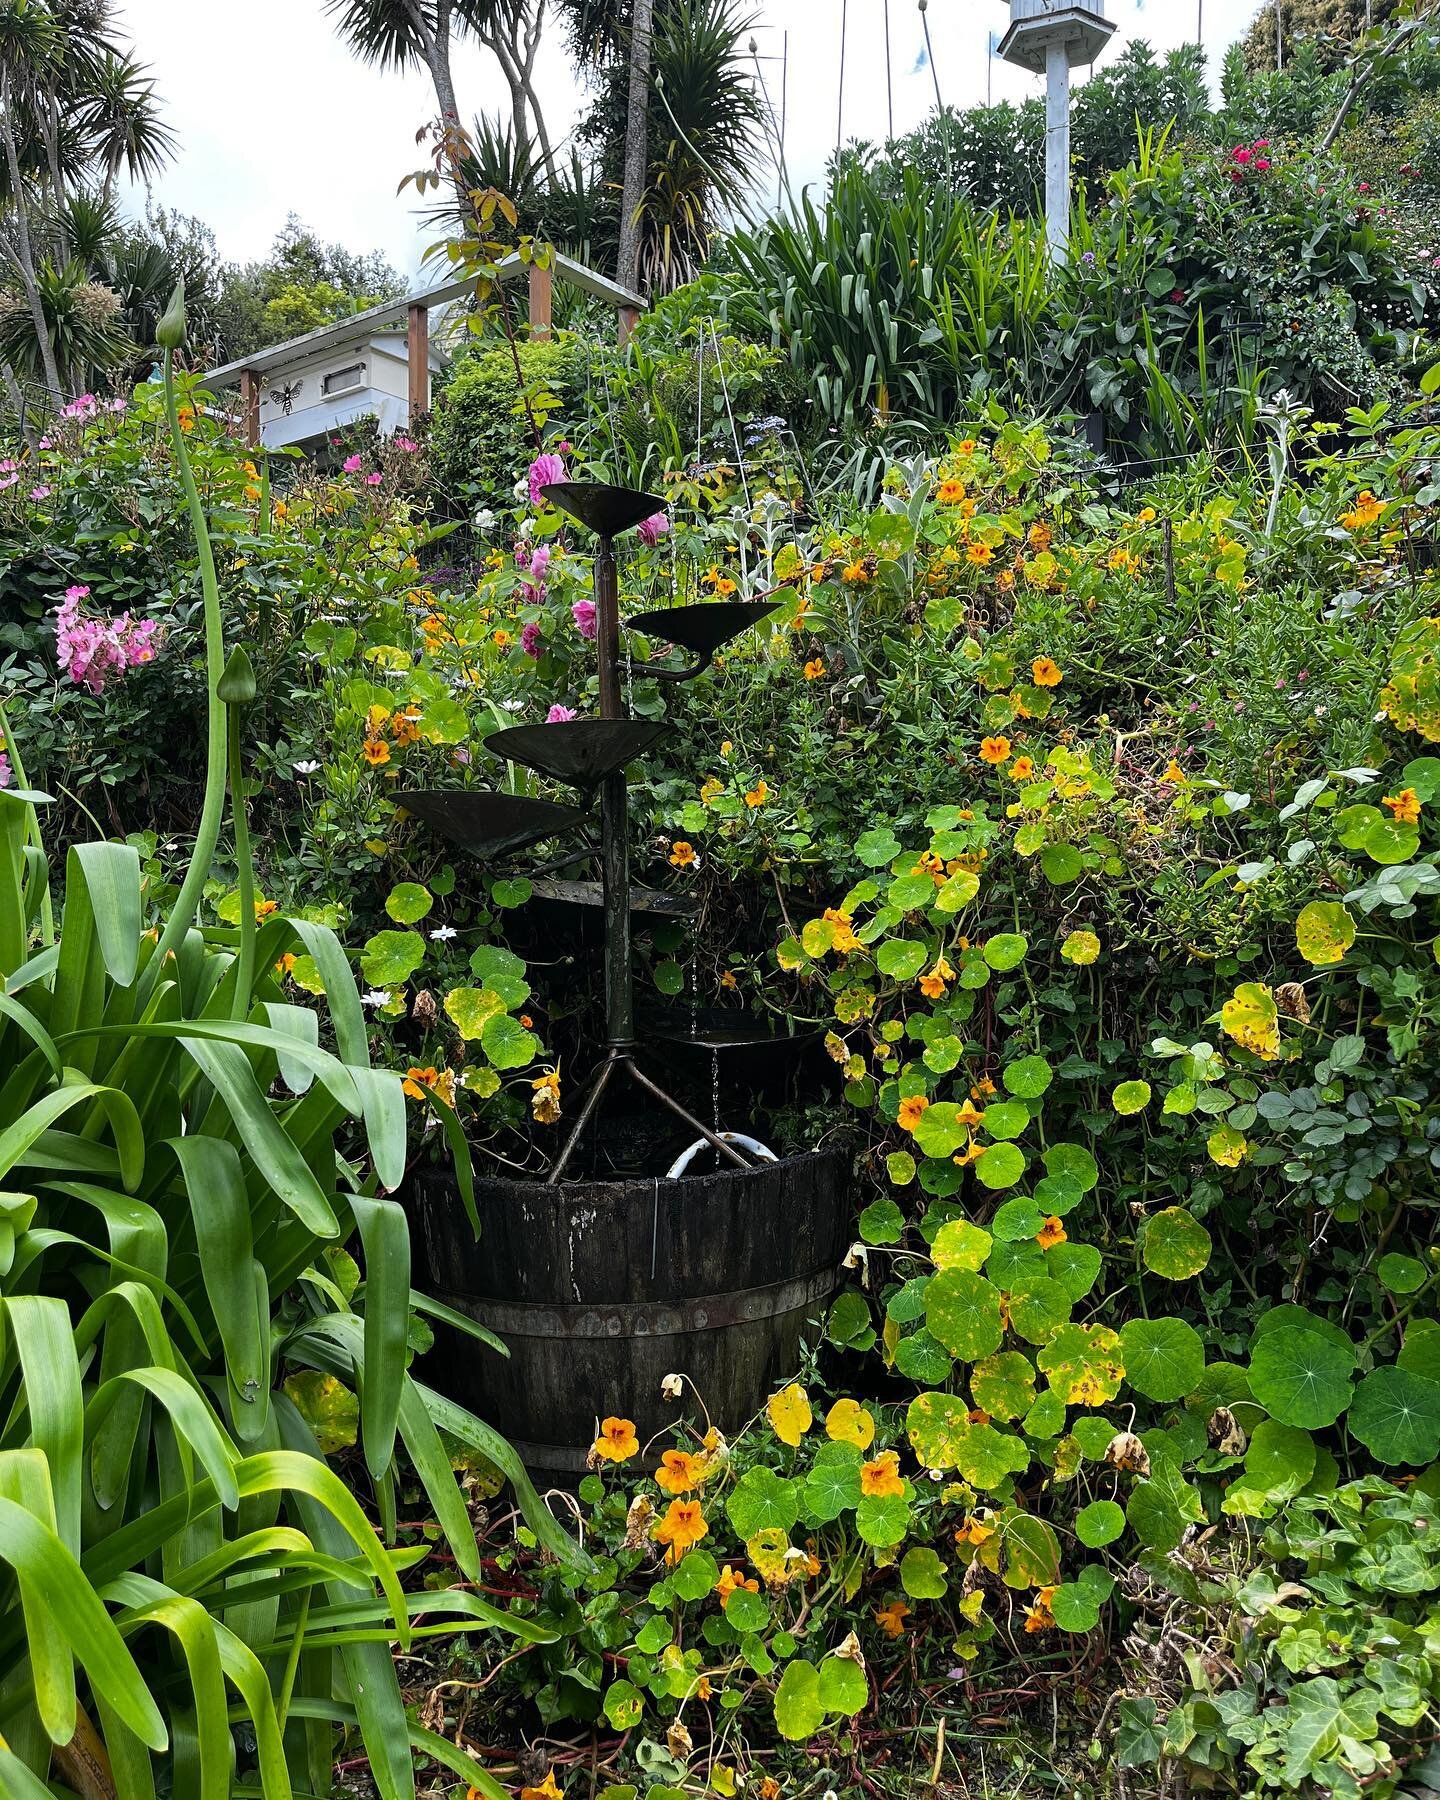 Amazing day in Pandeia Te Taiao - Garden for Wellbeing - right in the middle of St Heliers. An incredible use of a steep slope, full of life and food. I am feeling super inspired after a day of interesting people, so many different plants, insects, b